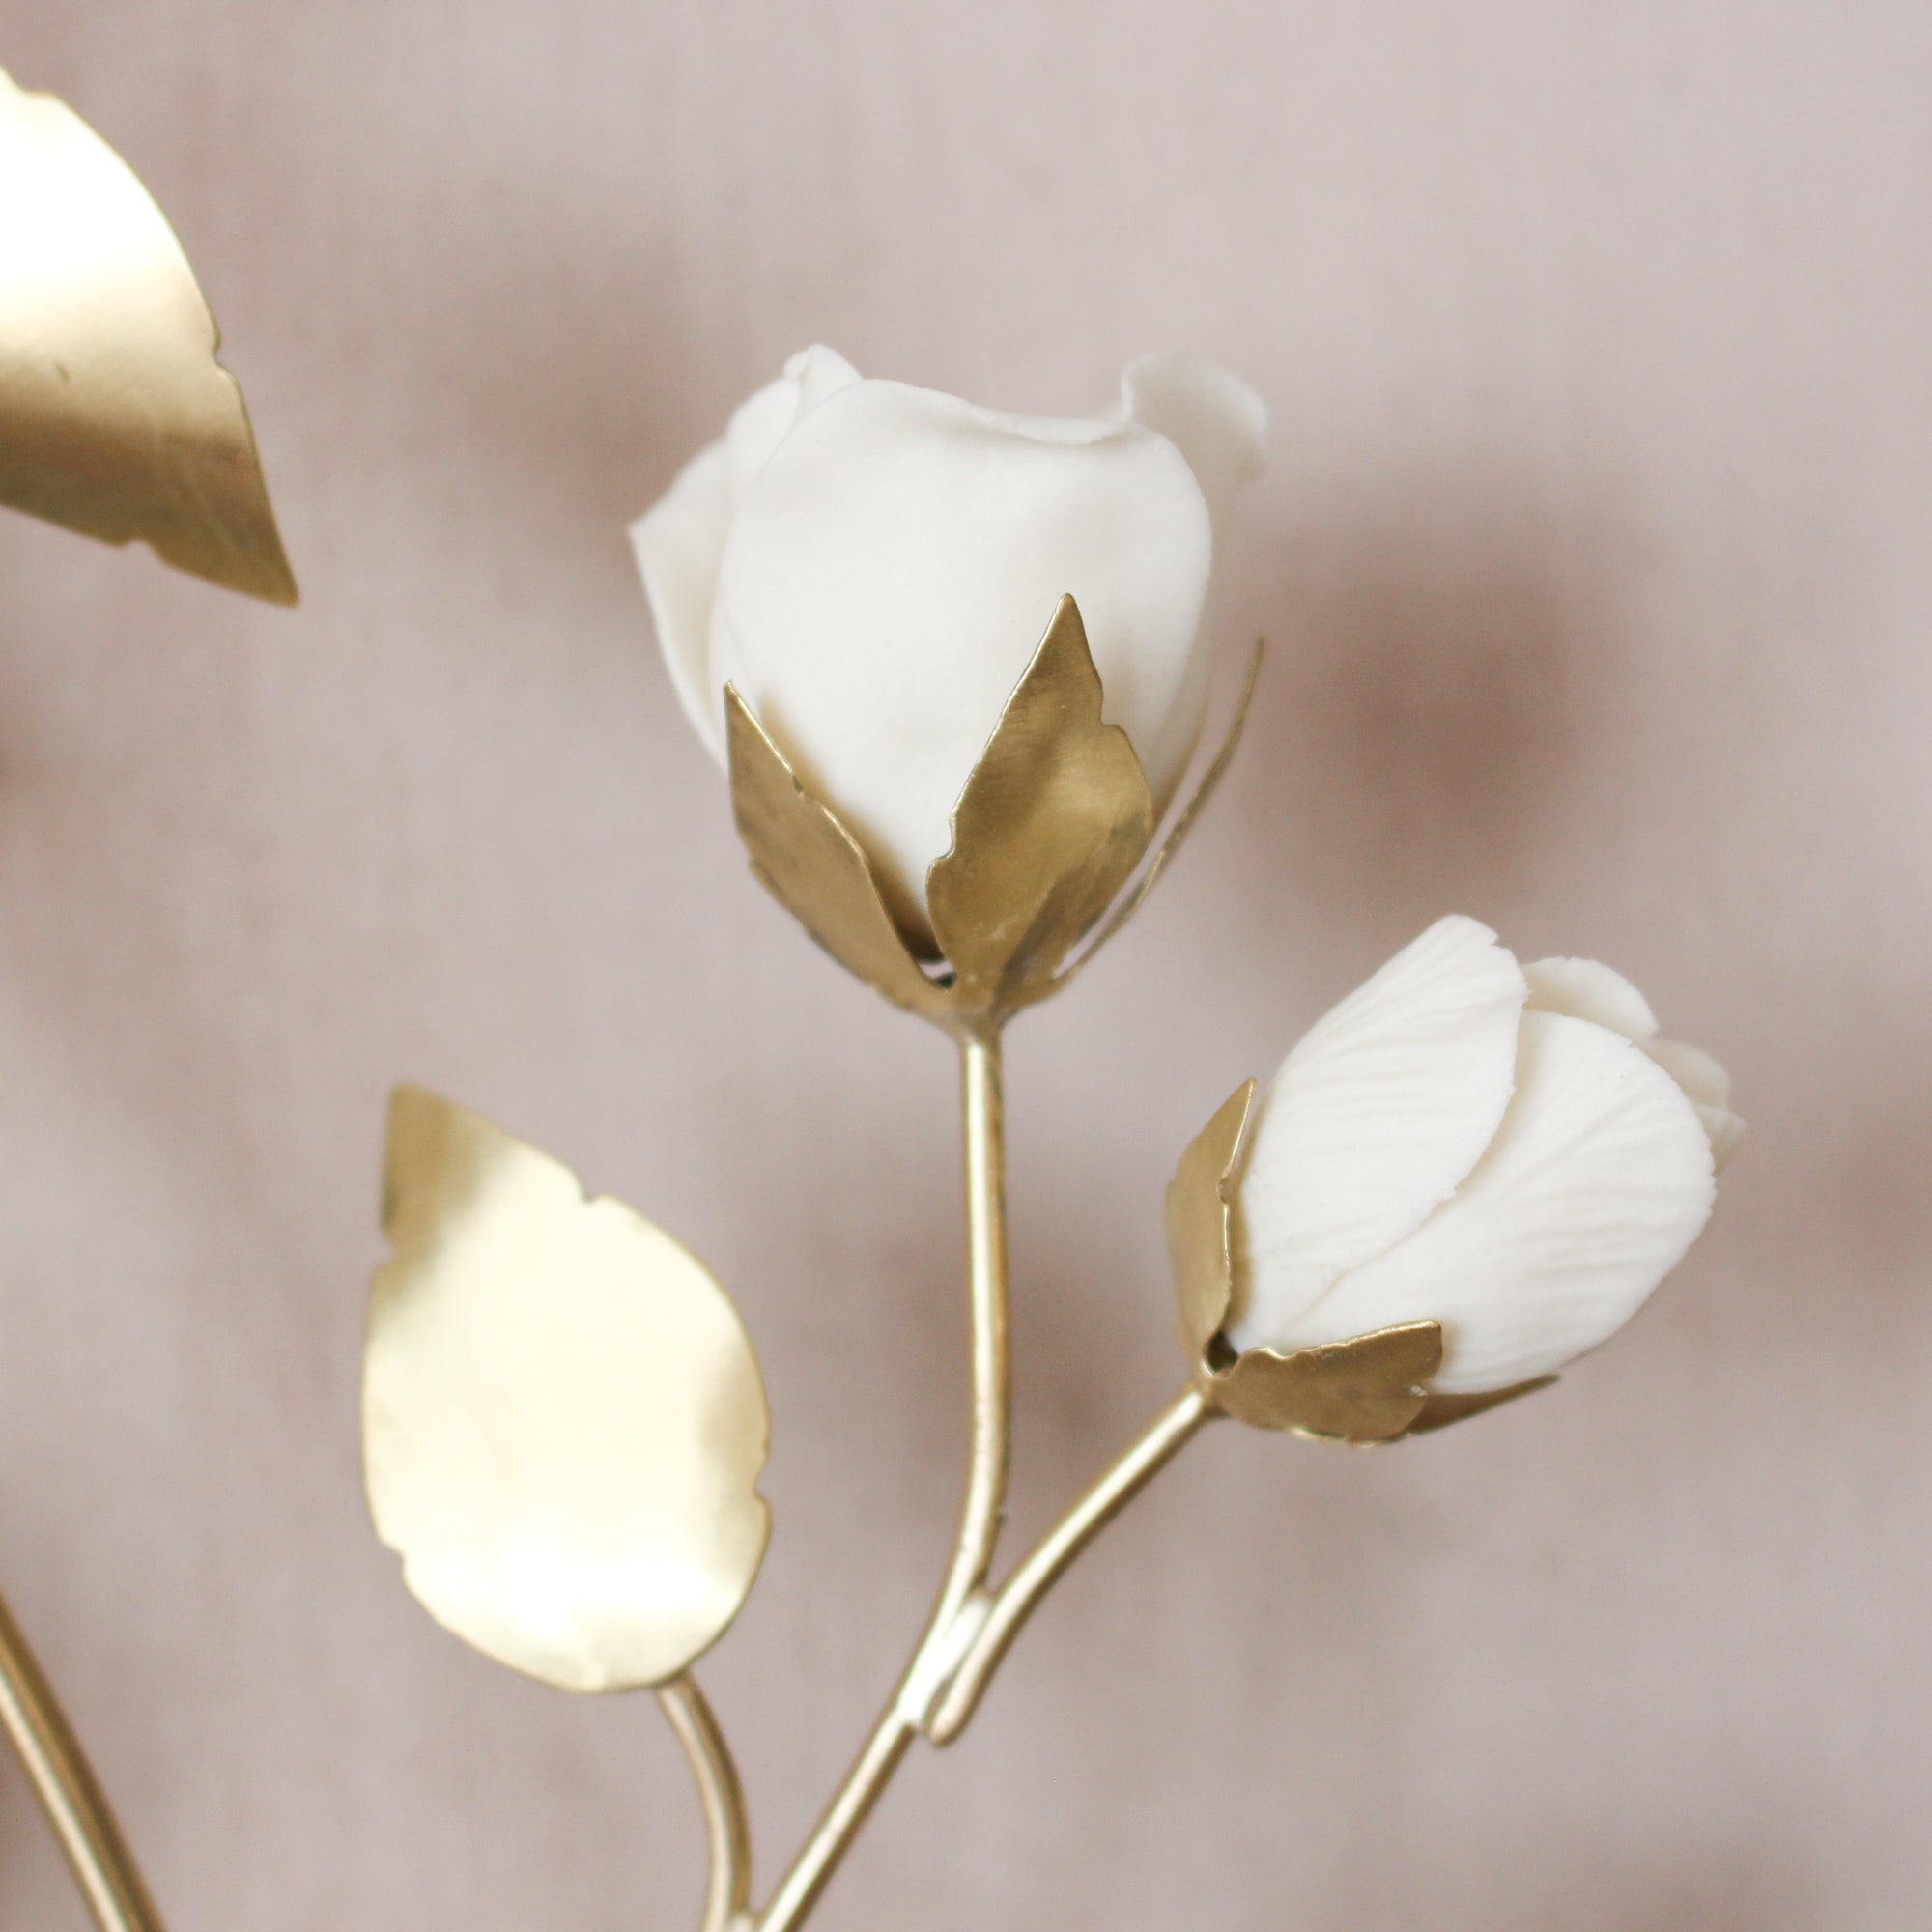 Porcelain and Brass Rose Bush by Alain Granell